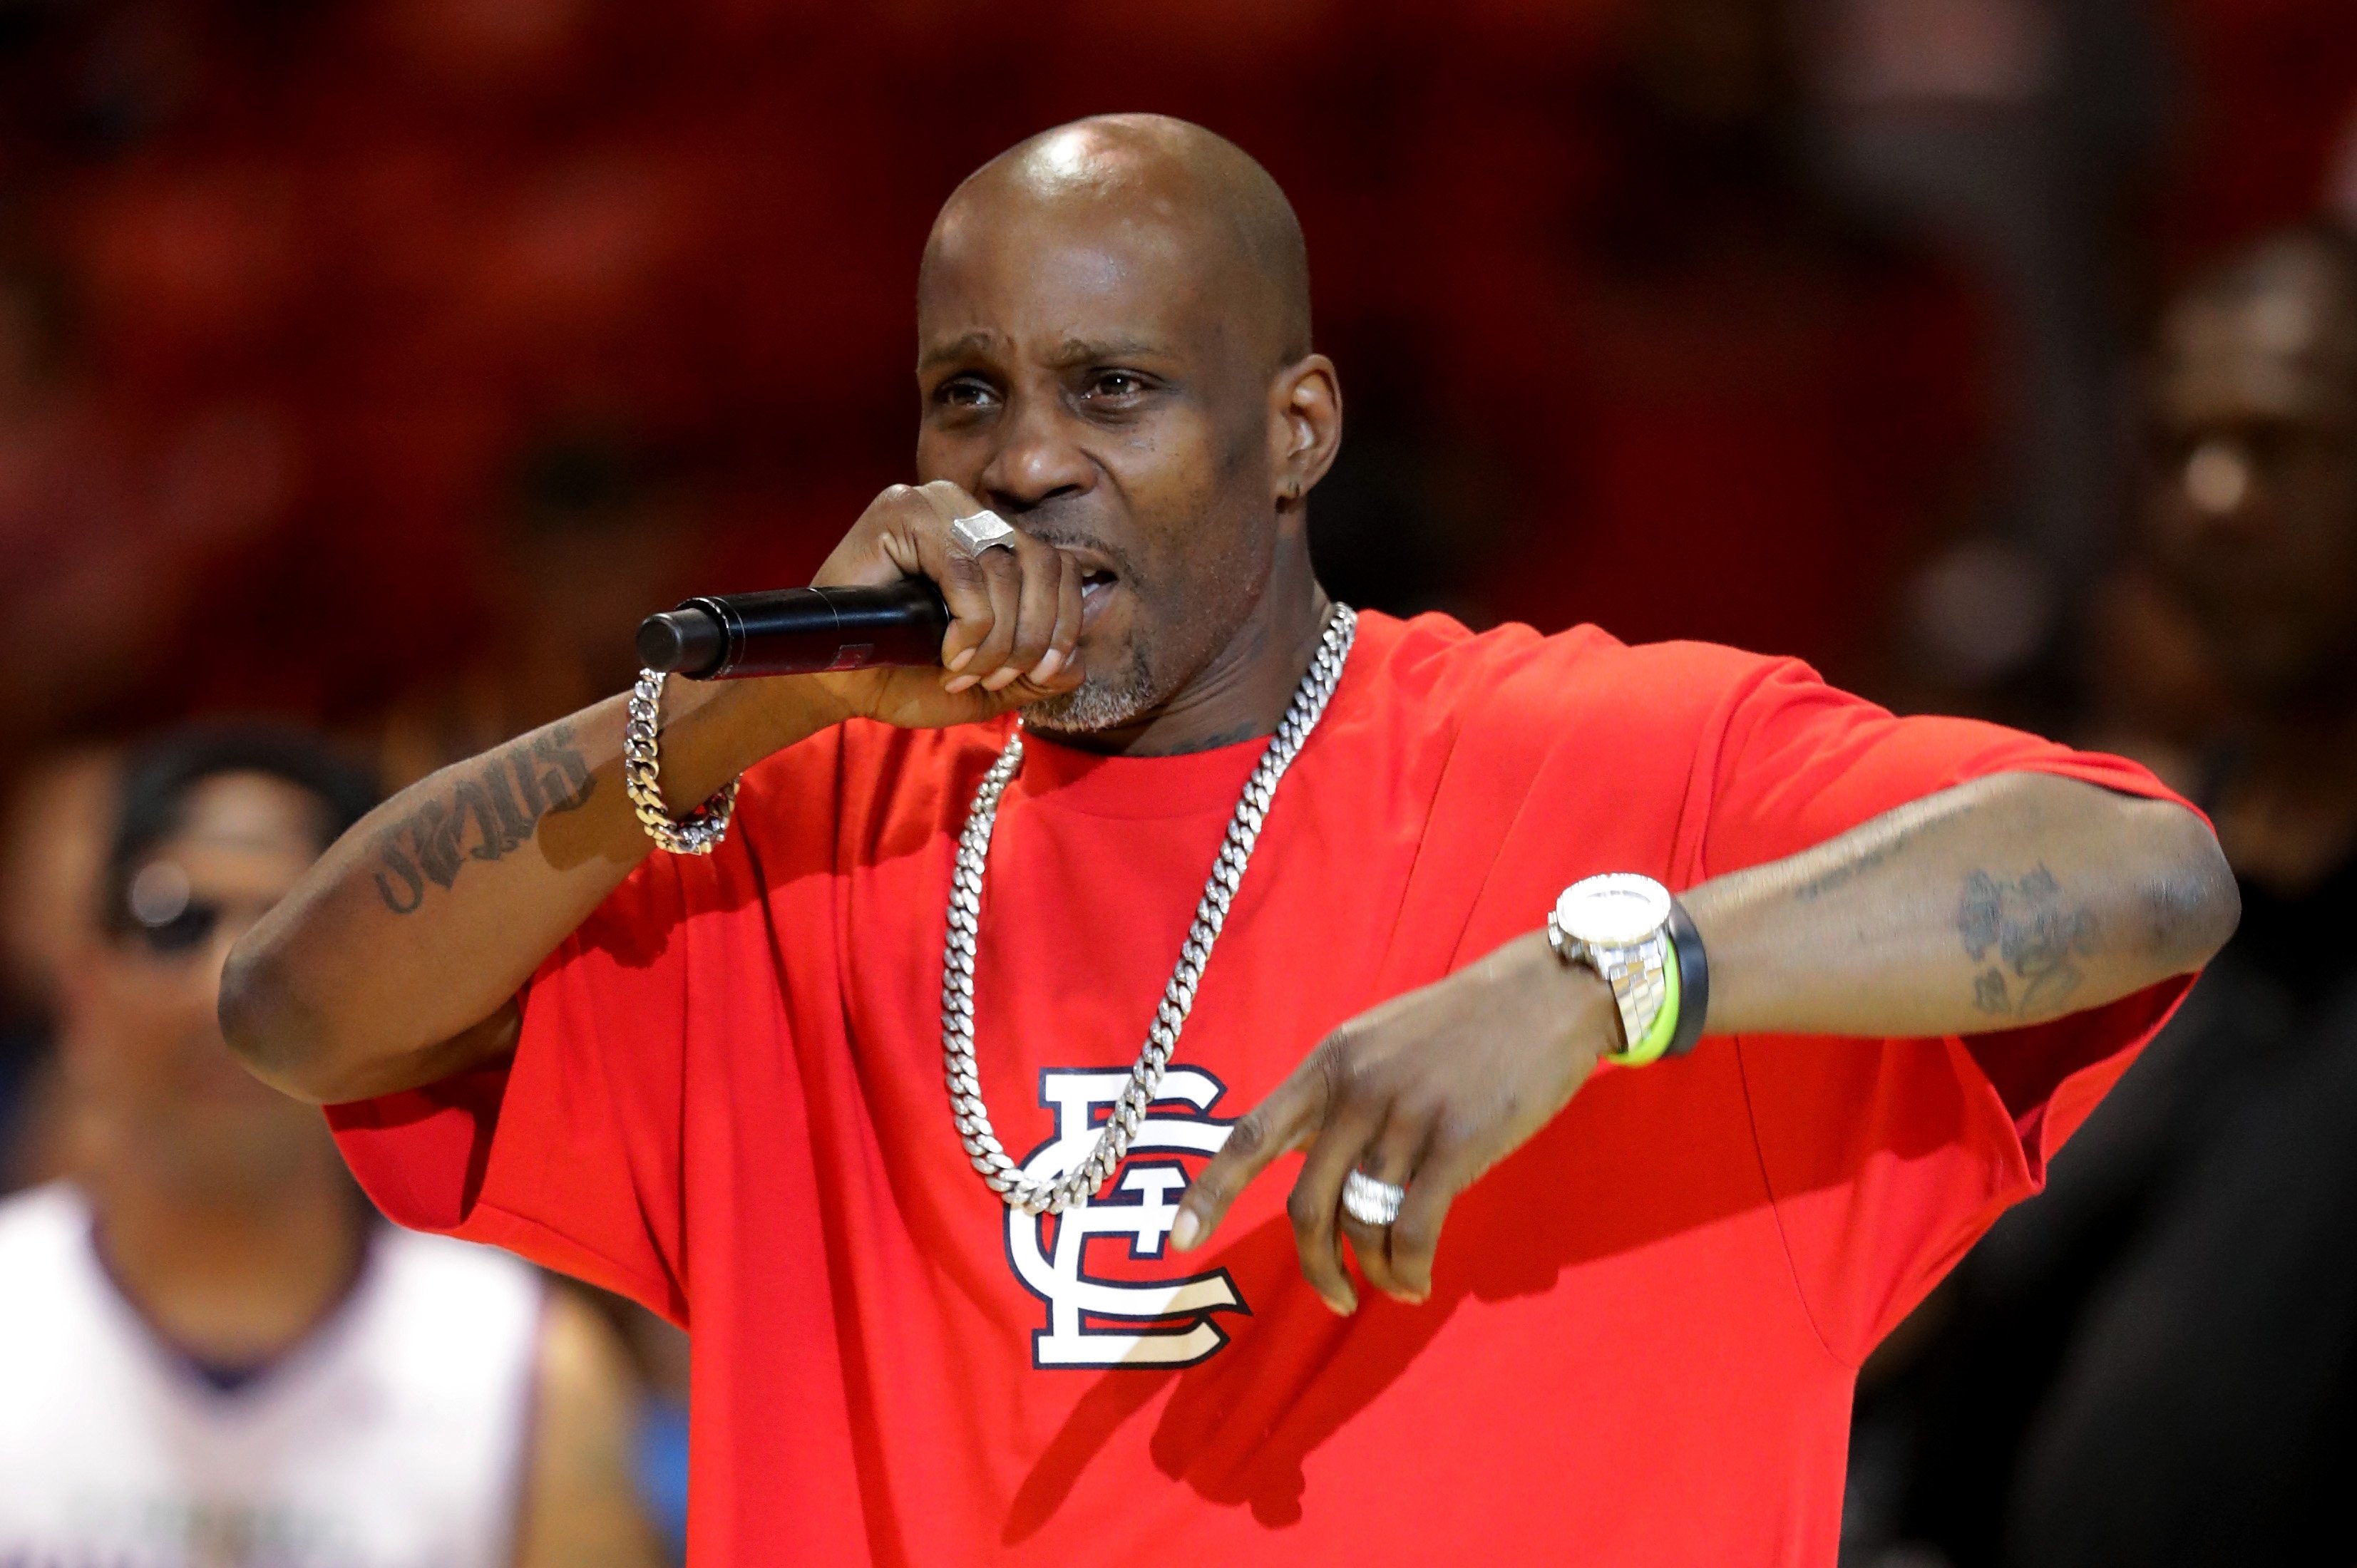 Rapper DMX performing at event in Chicago